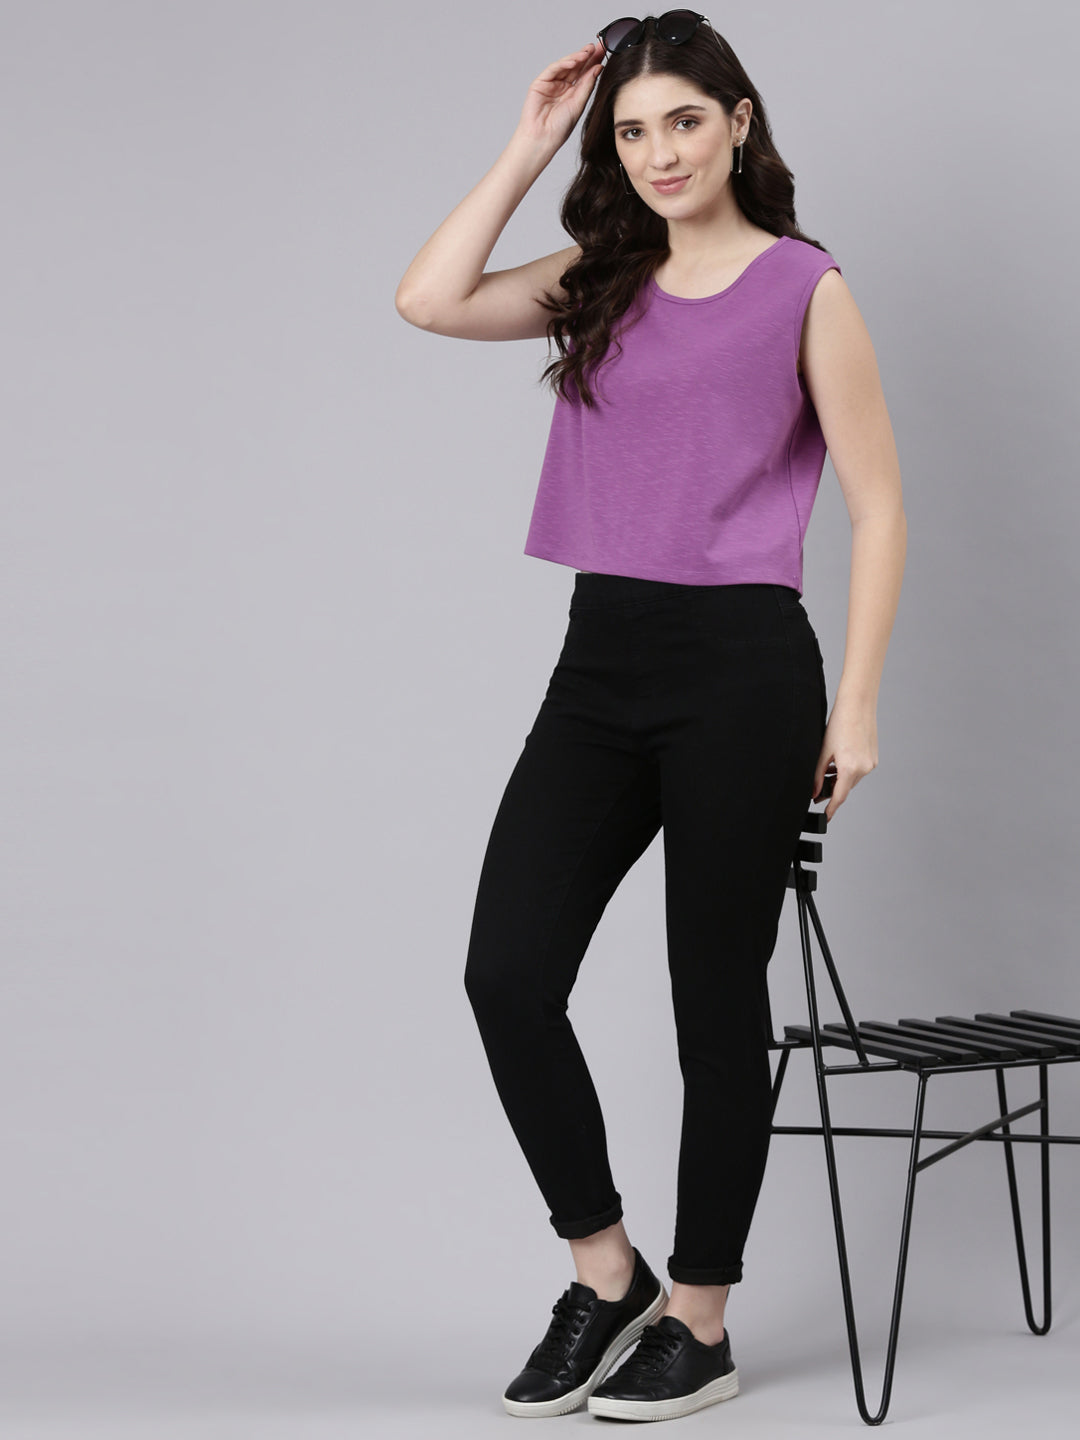 Buy TheShaili Crop Top for Woman's plus size / on-trend/ versatile/stylish